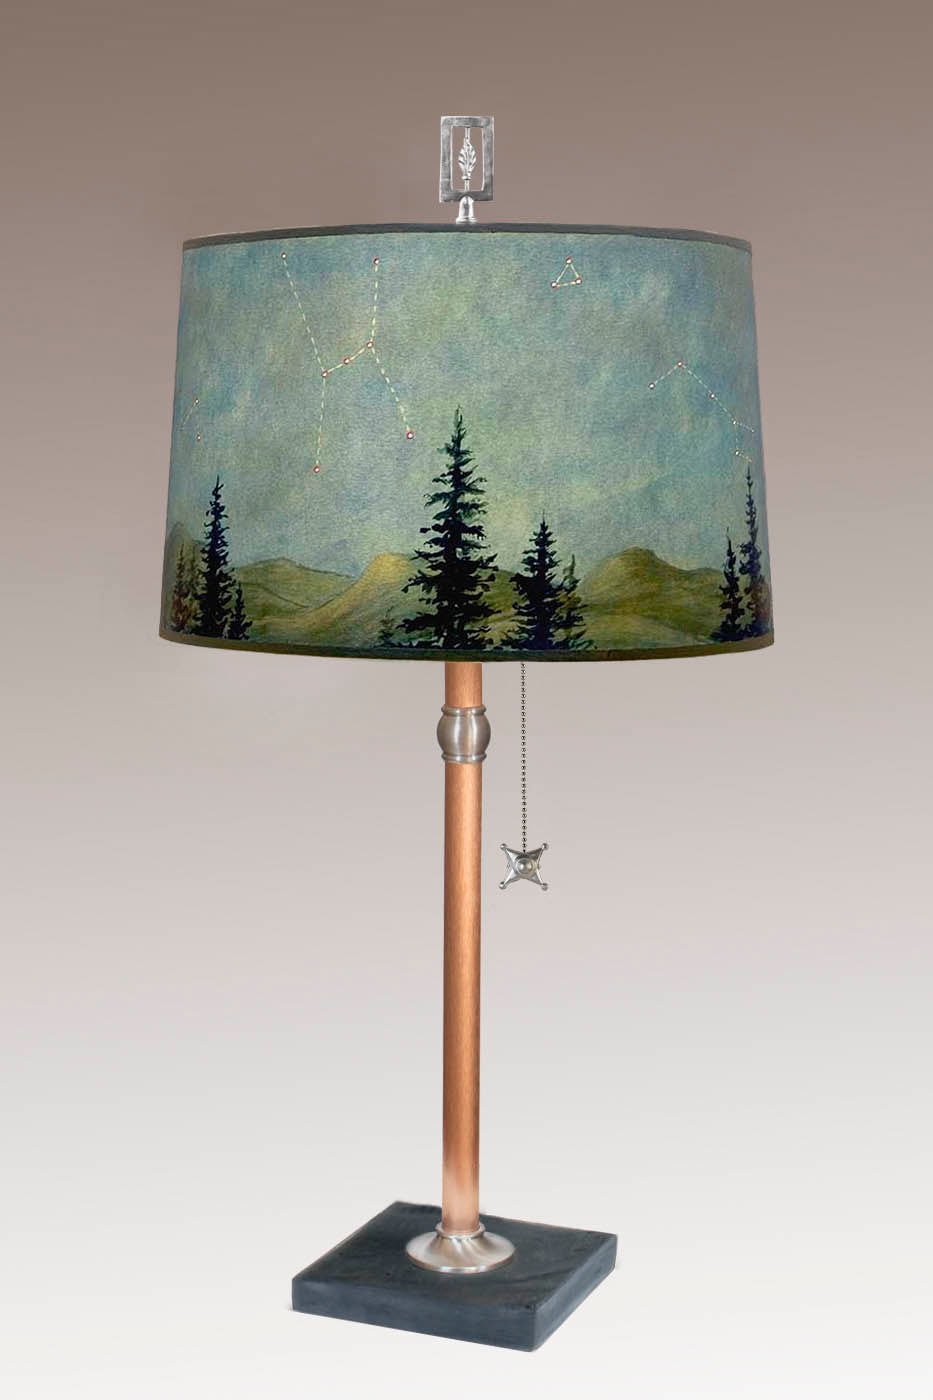 Copper Table Lamp with Large Drum Shade in Midnight Sky